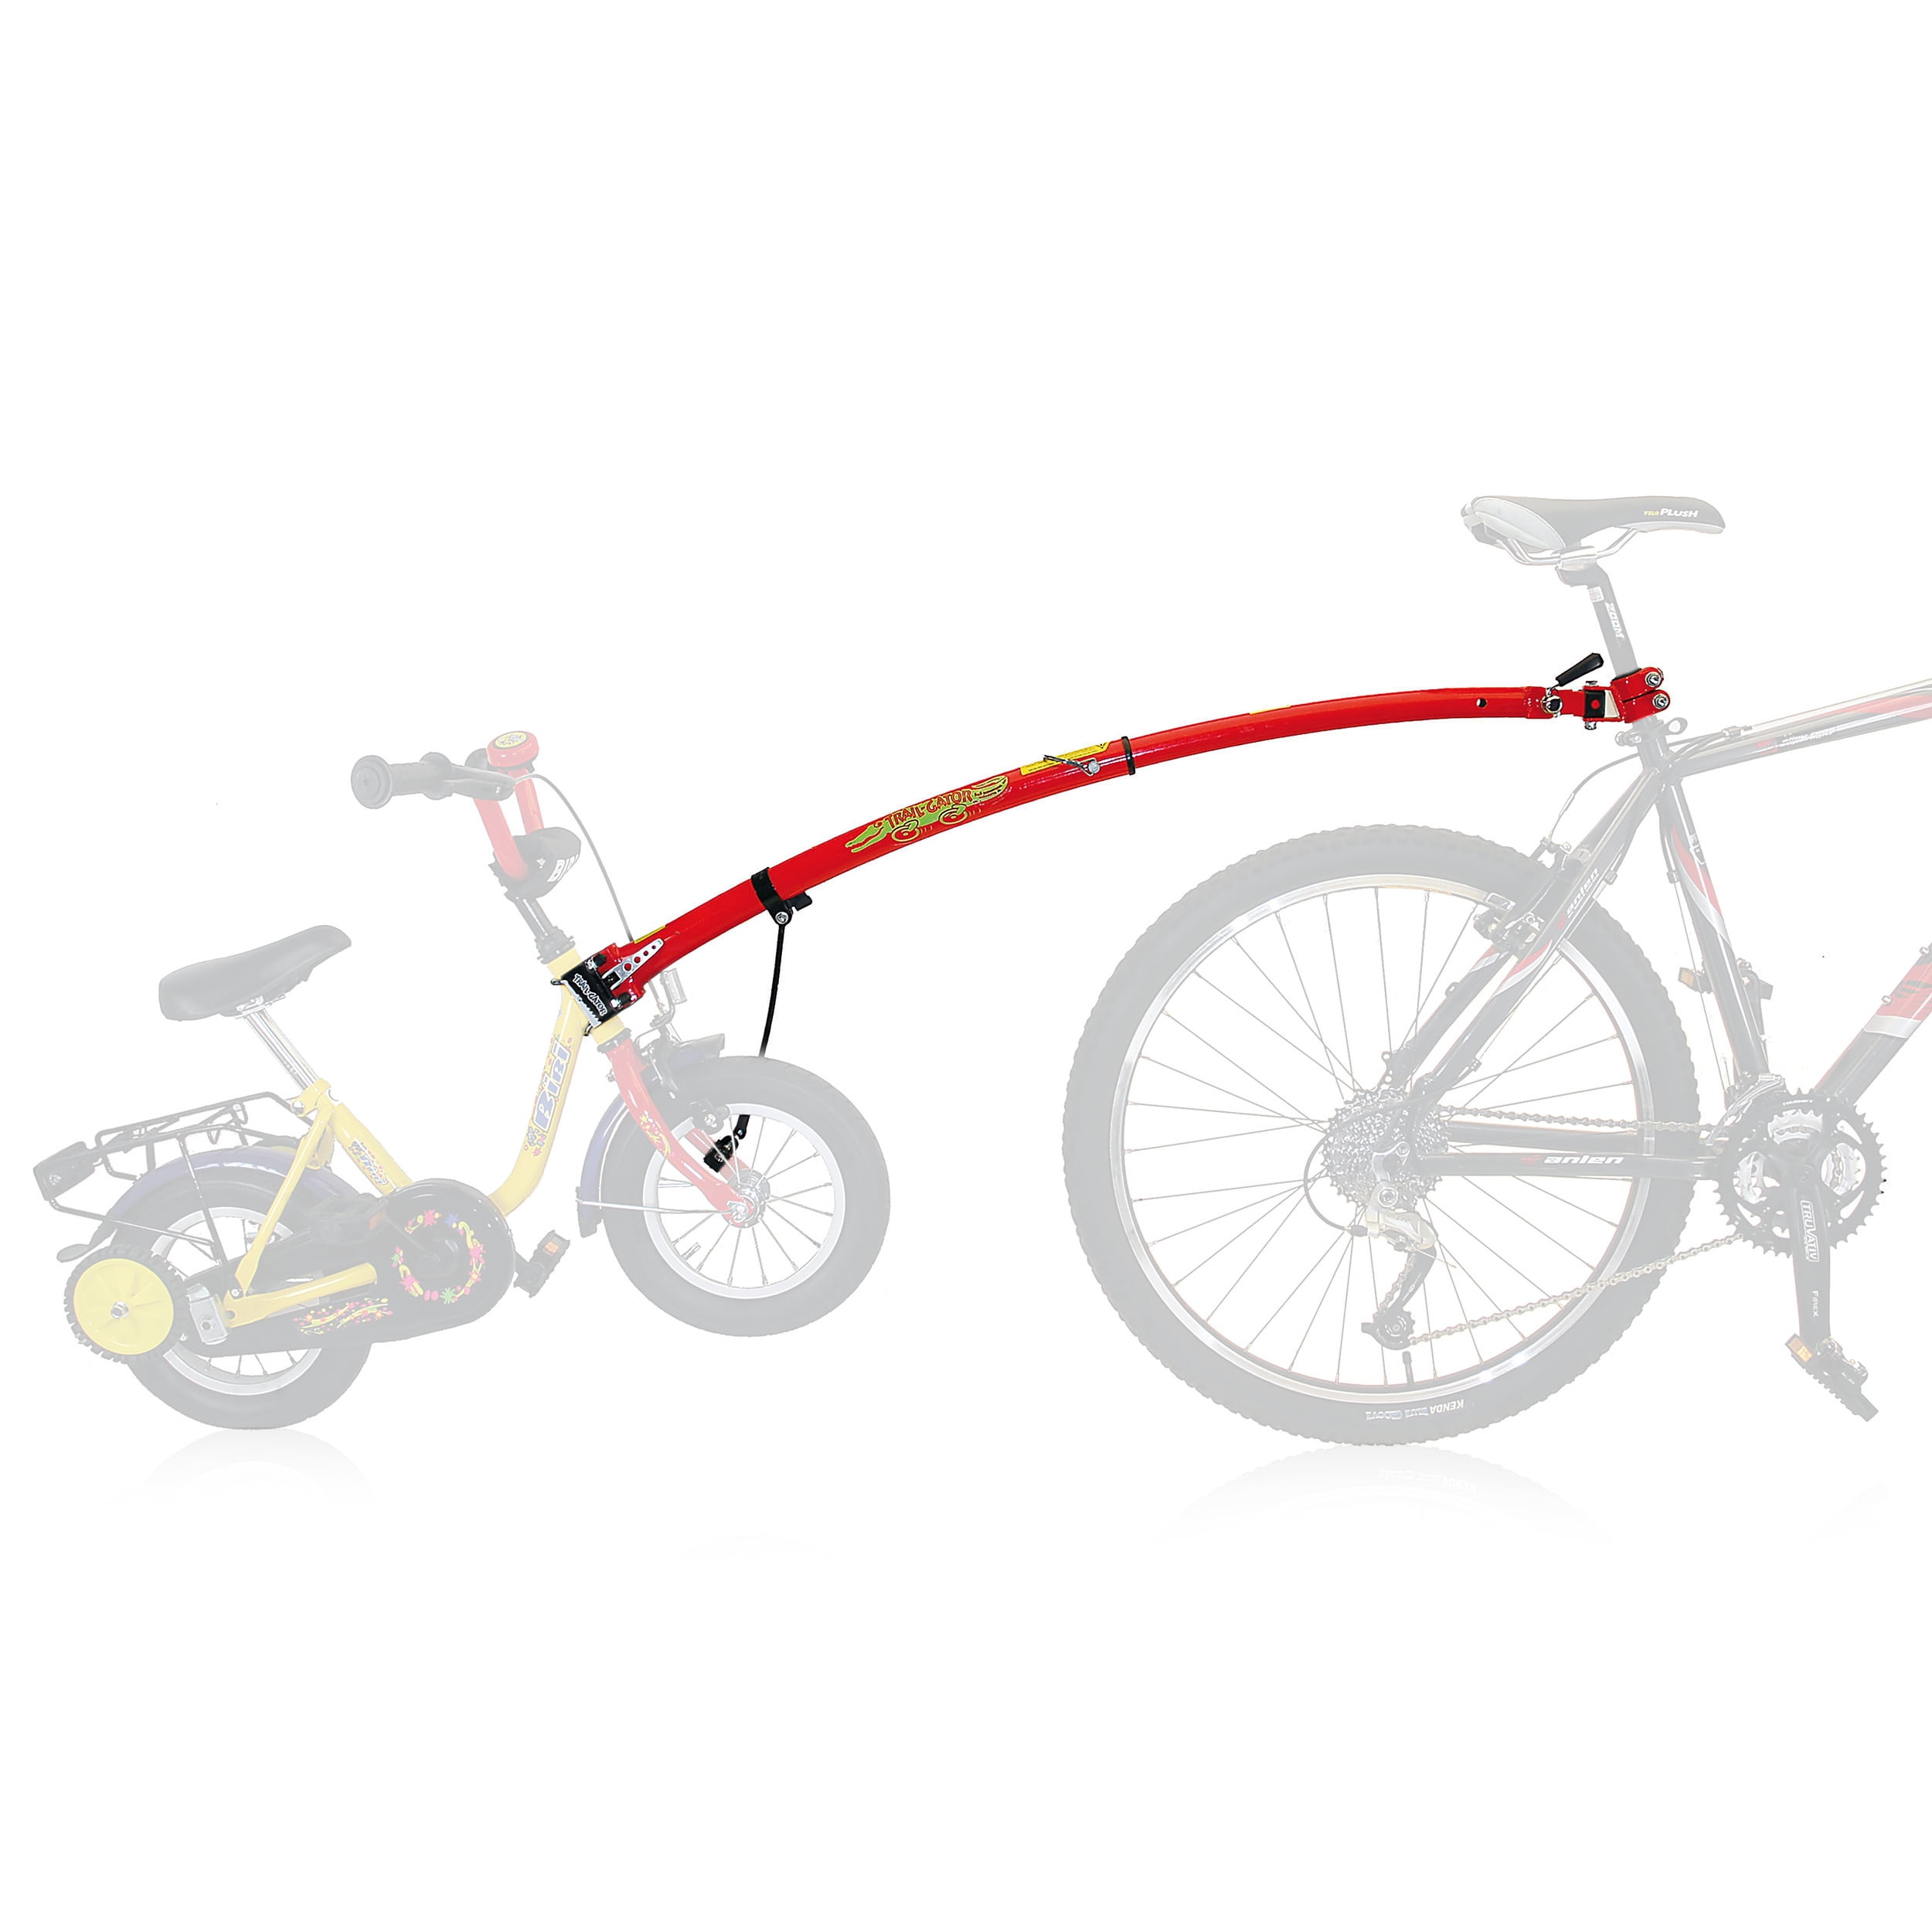 Burley Bee In UK stock for immediate delivery classic bike trailer for kids 